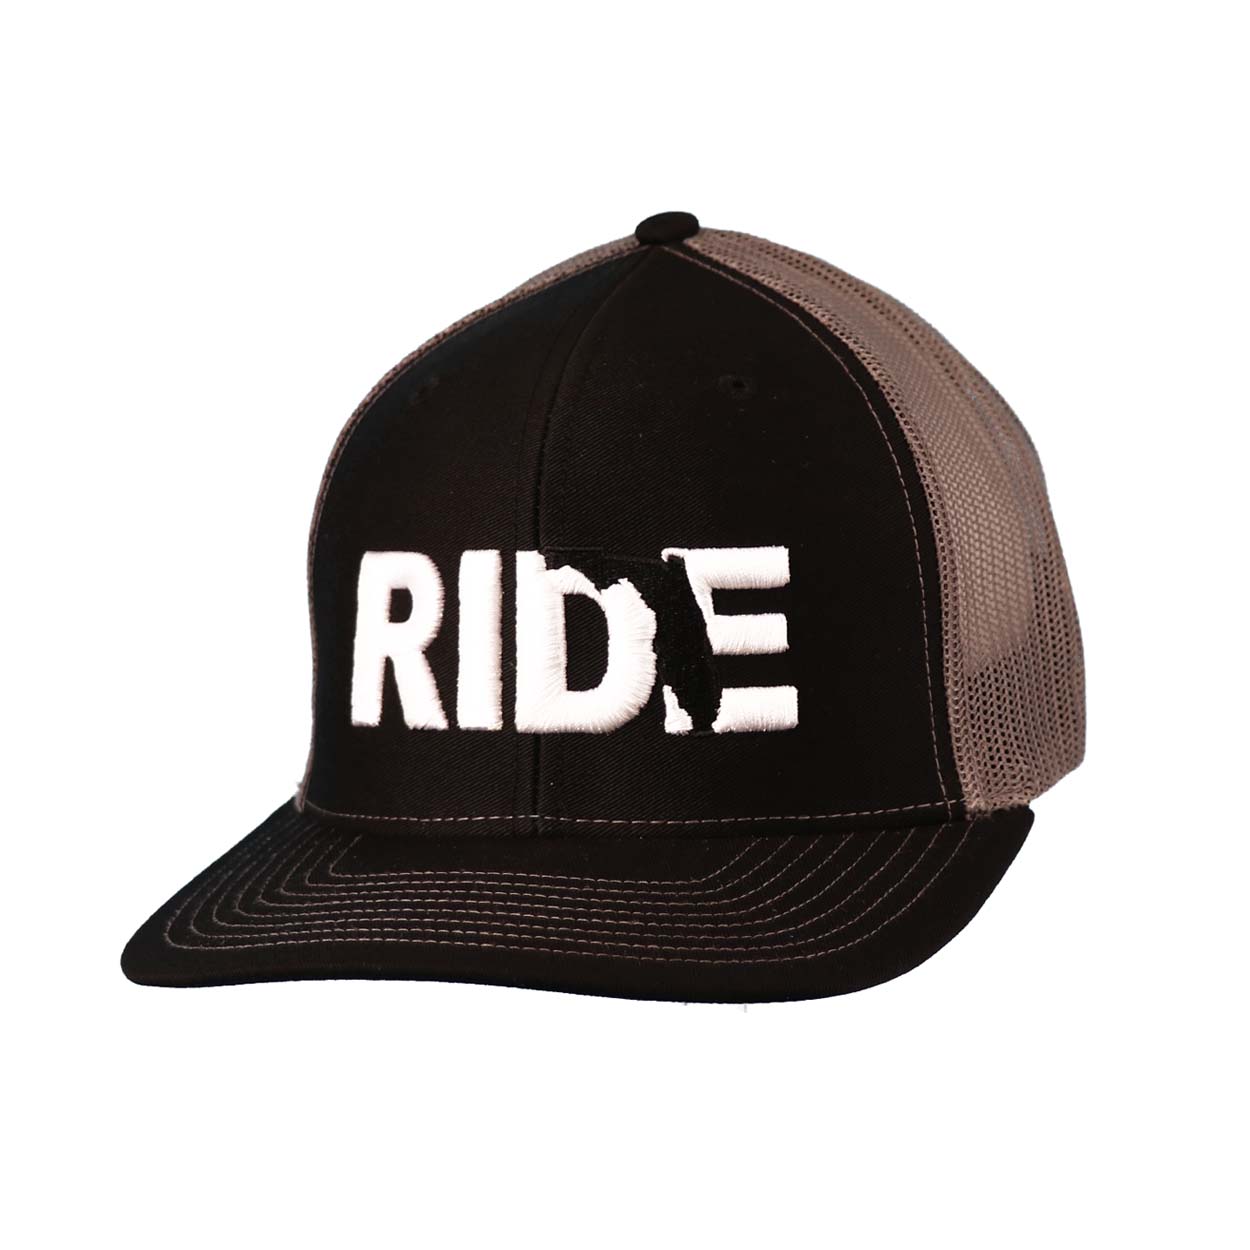 Ride Florida Classic Embroidered Snapback Trucker Hat Black/Gray